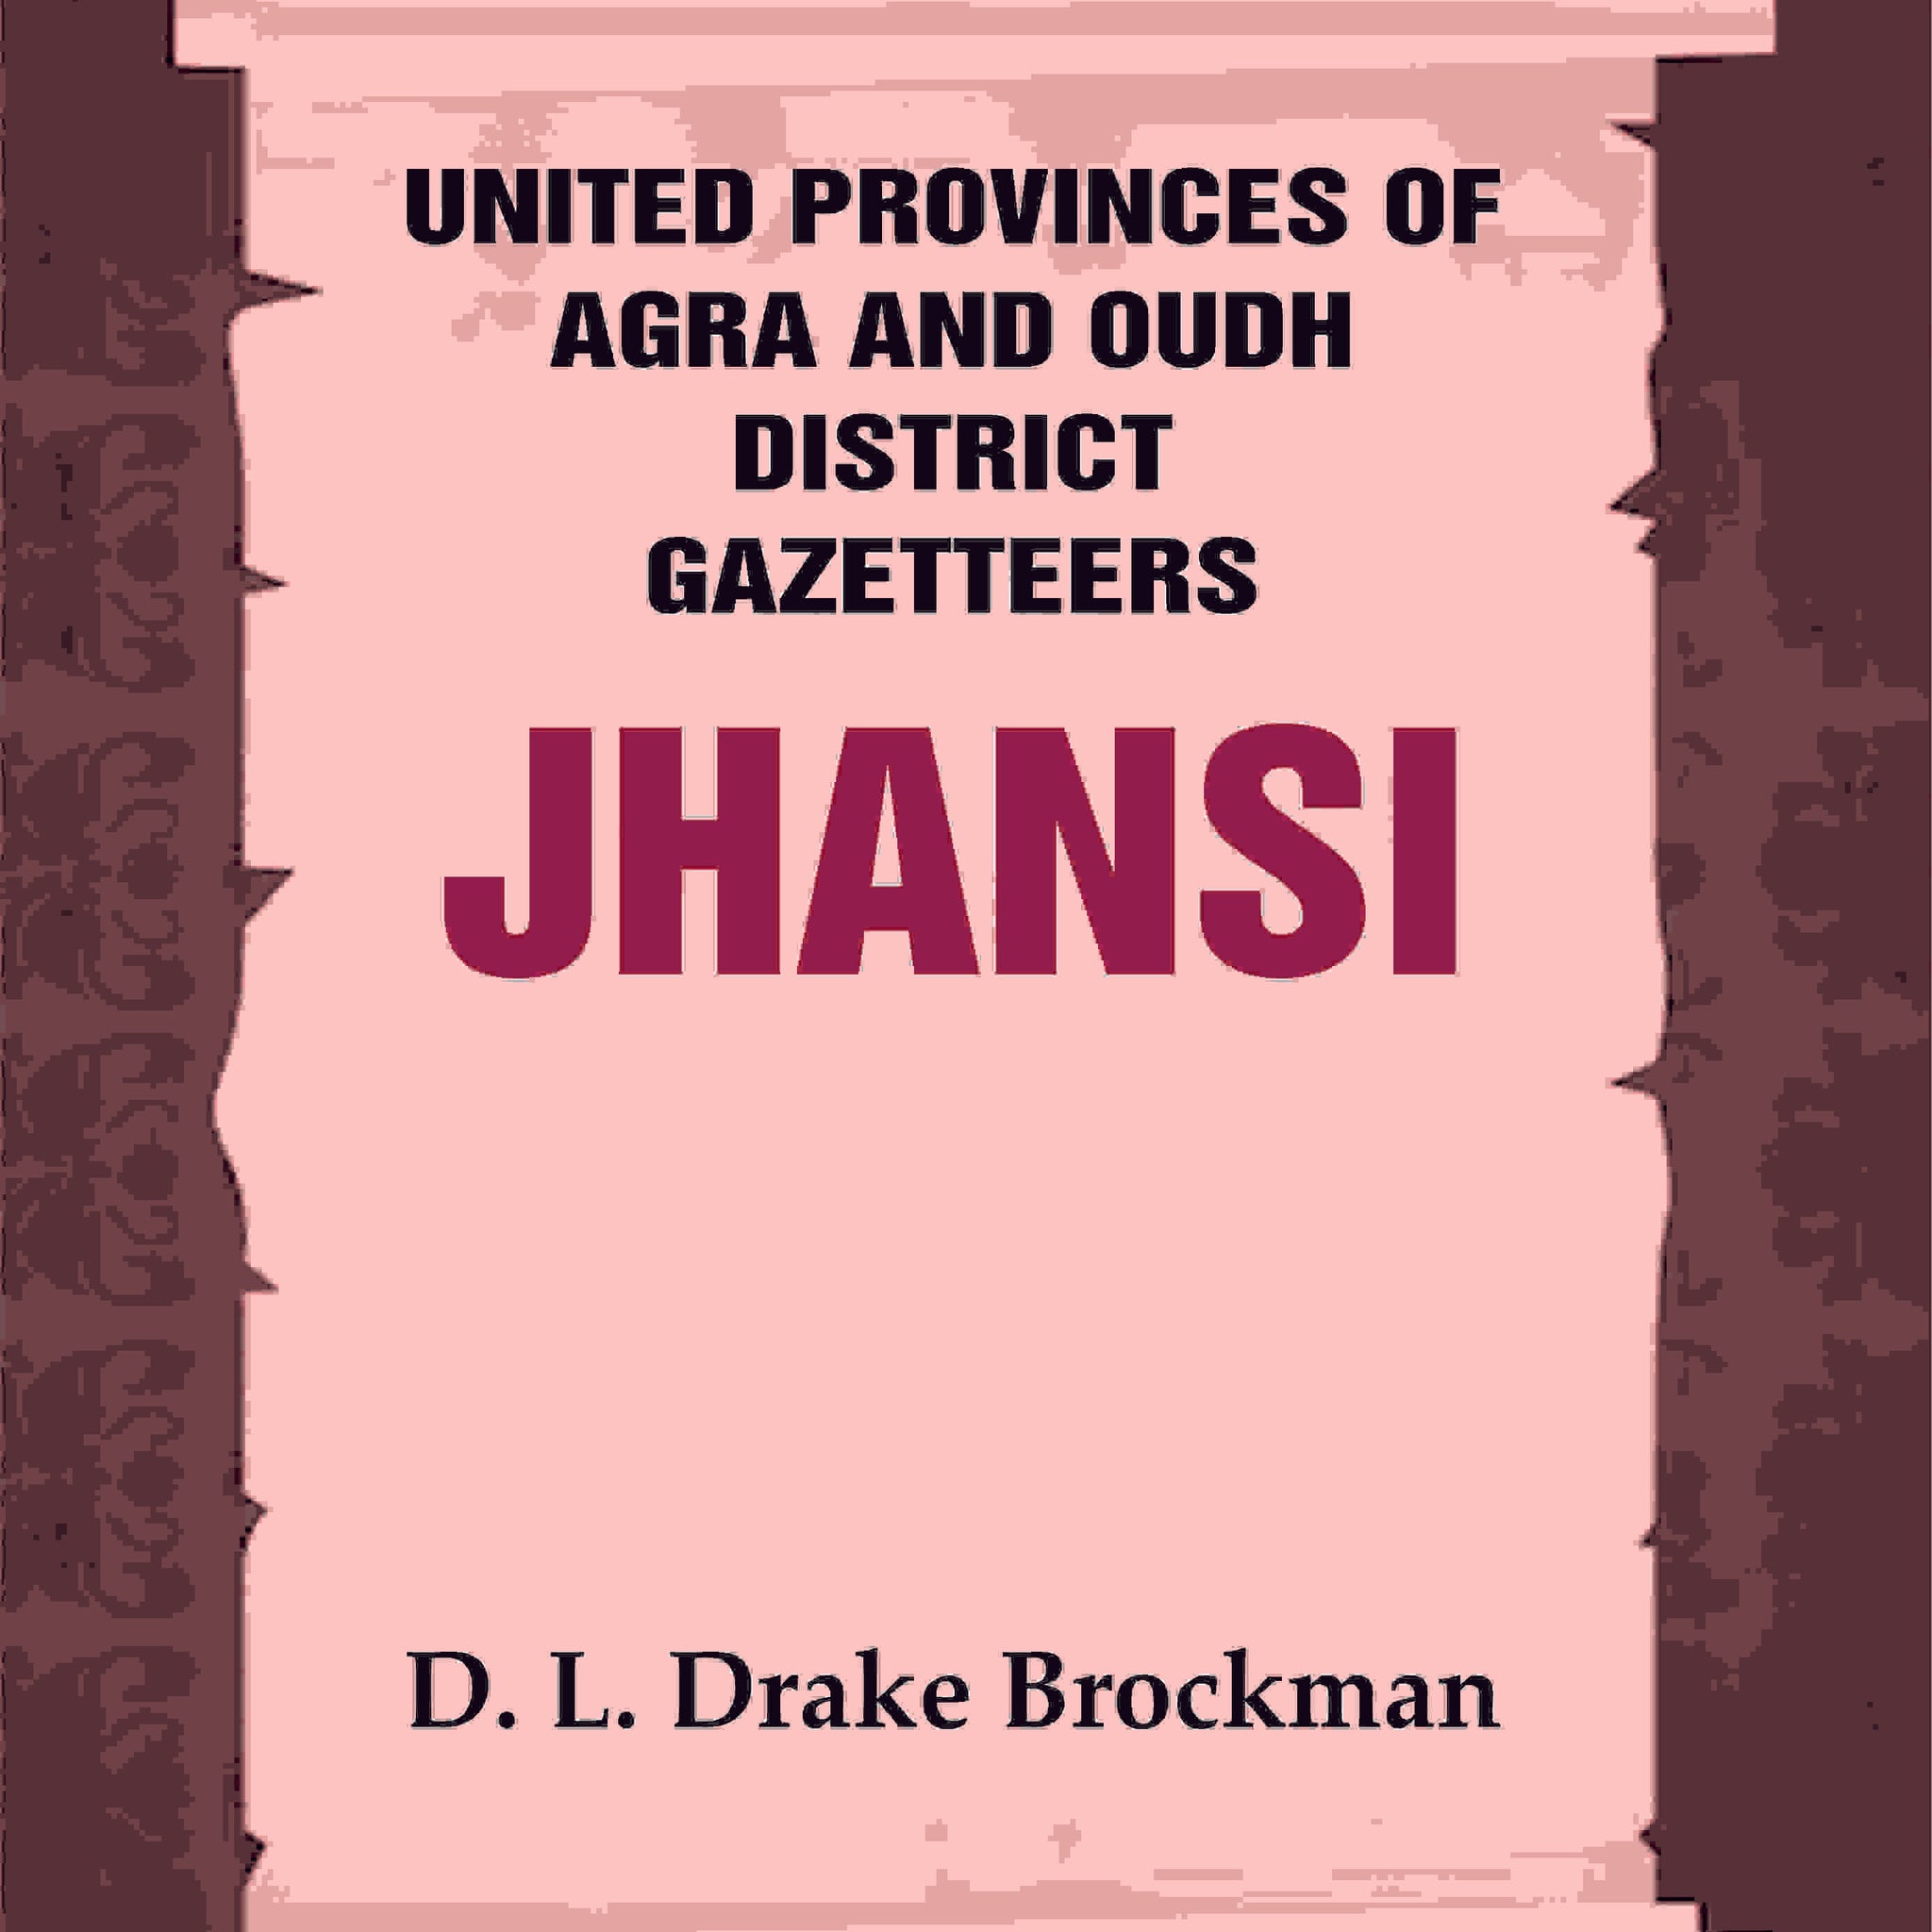 United Provinces of Agra and Oudh District Gazetteers: Jhansi